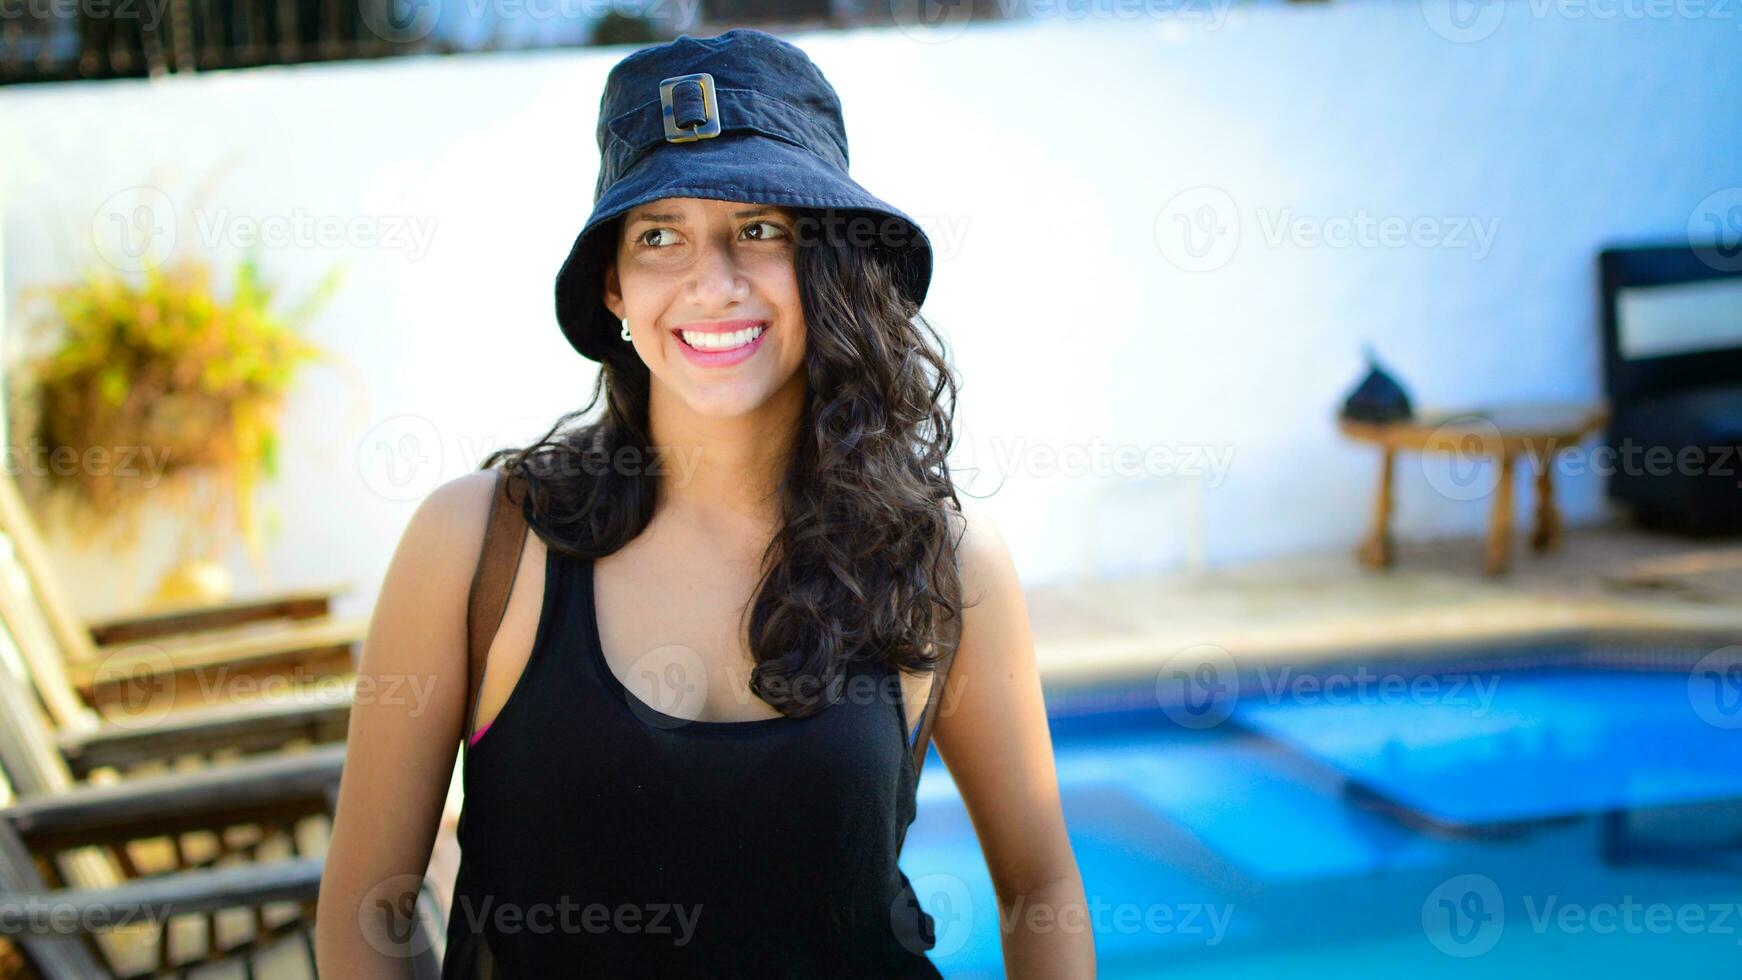 Pretty girl with hat smiling near a swimming pool, latin girl smiling by a swimming pool with muskoka chairs photo